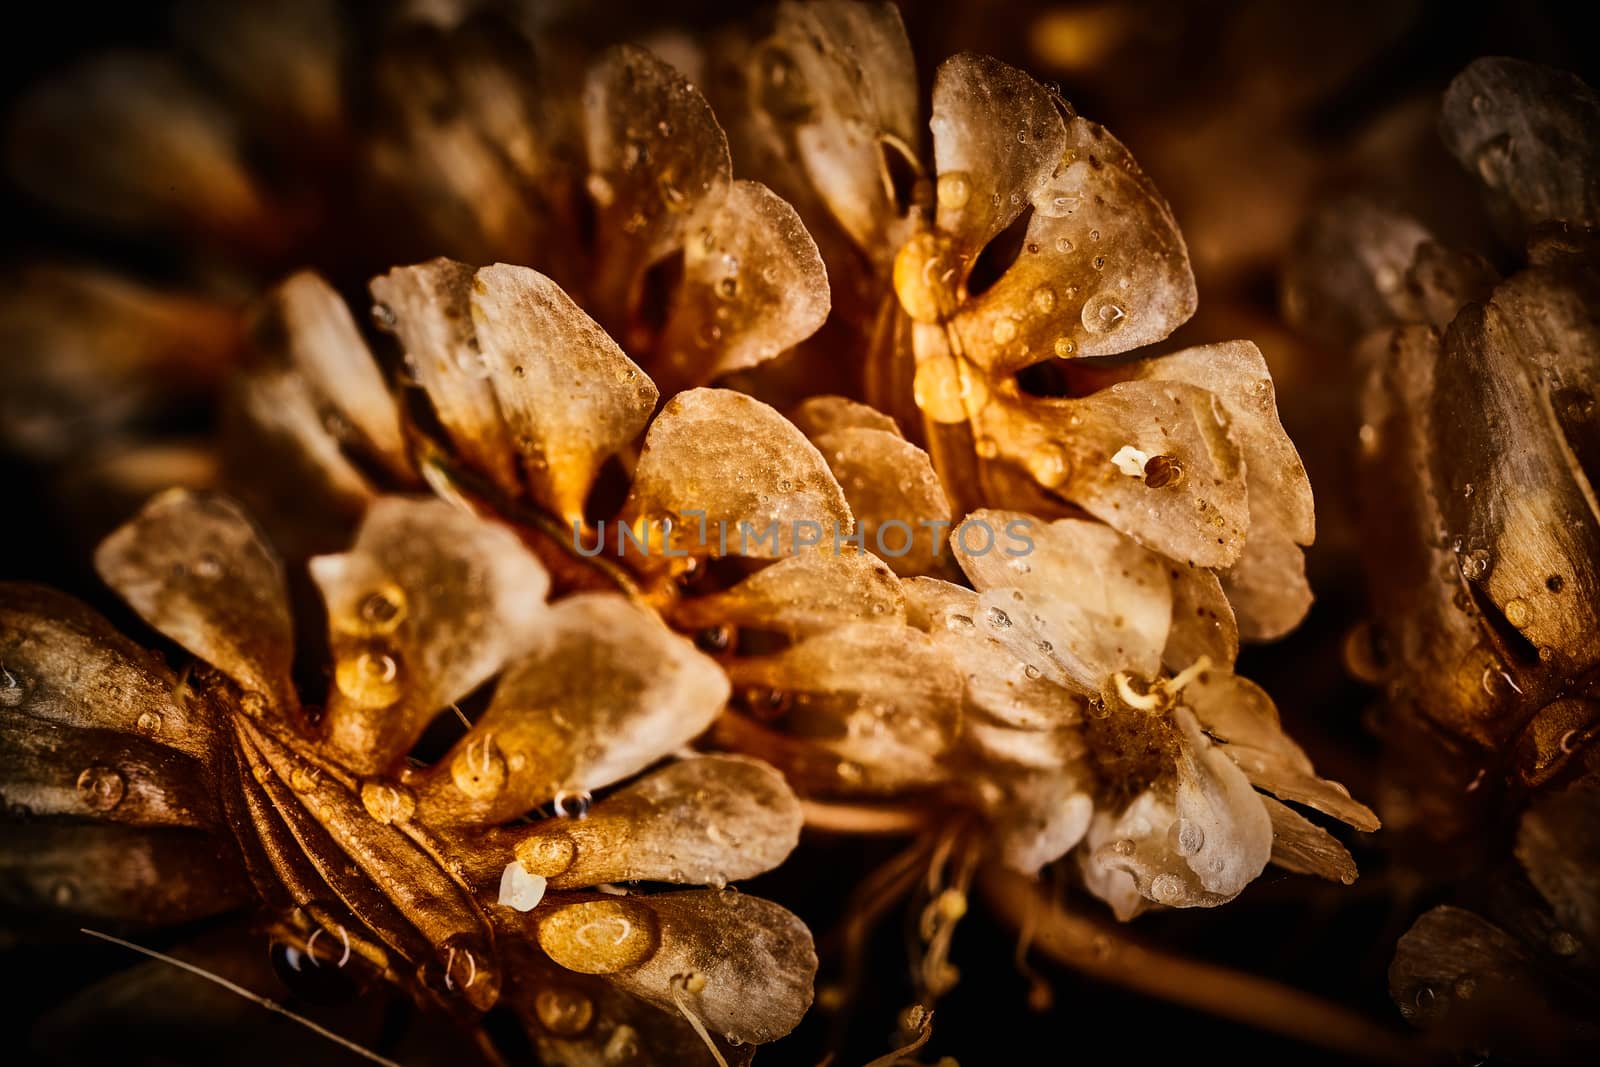 Dry plant dramatic macro close up view with raindrops by rasika108